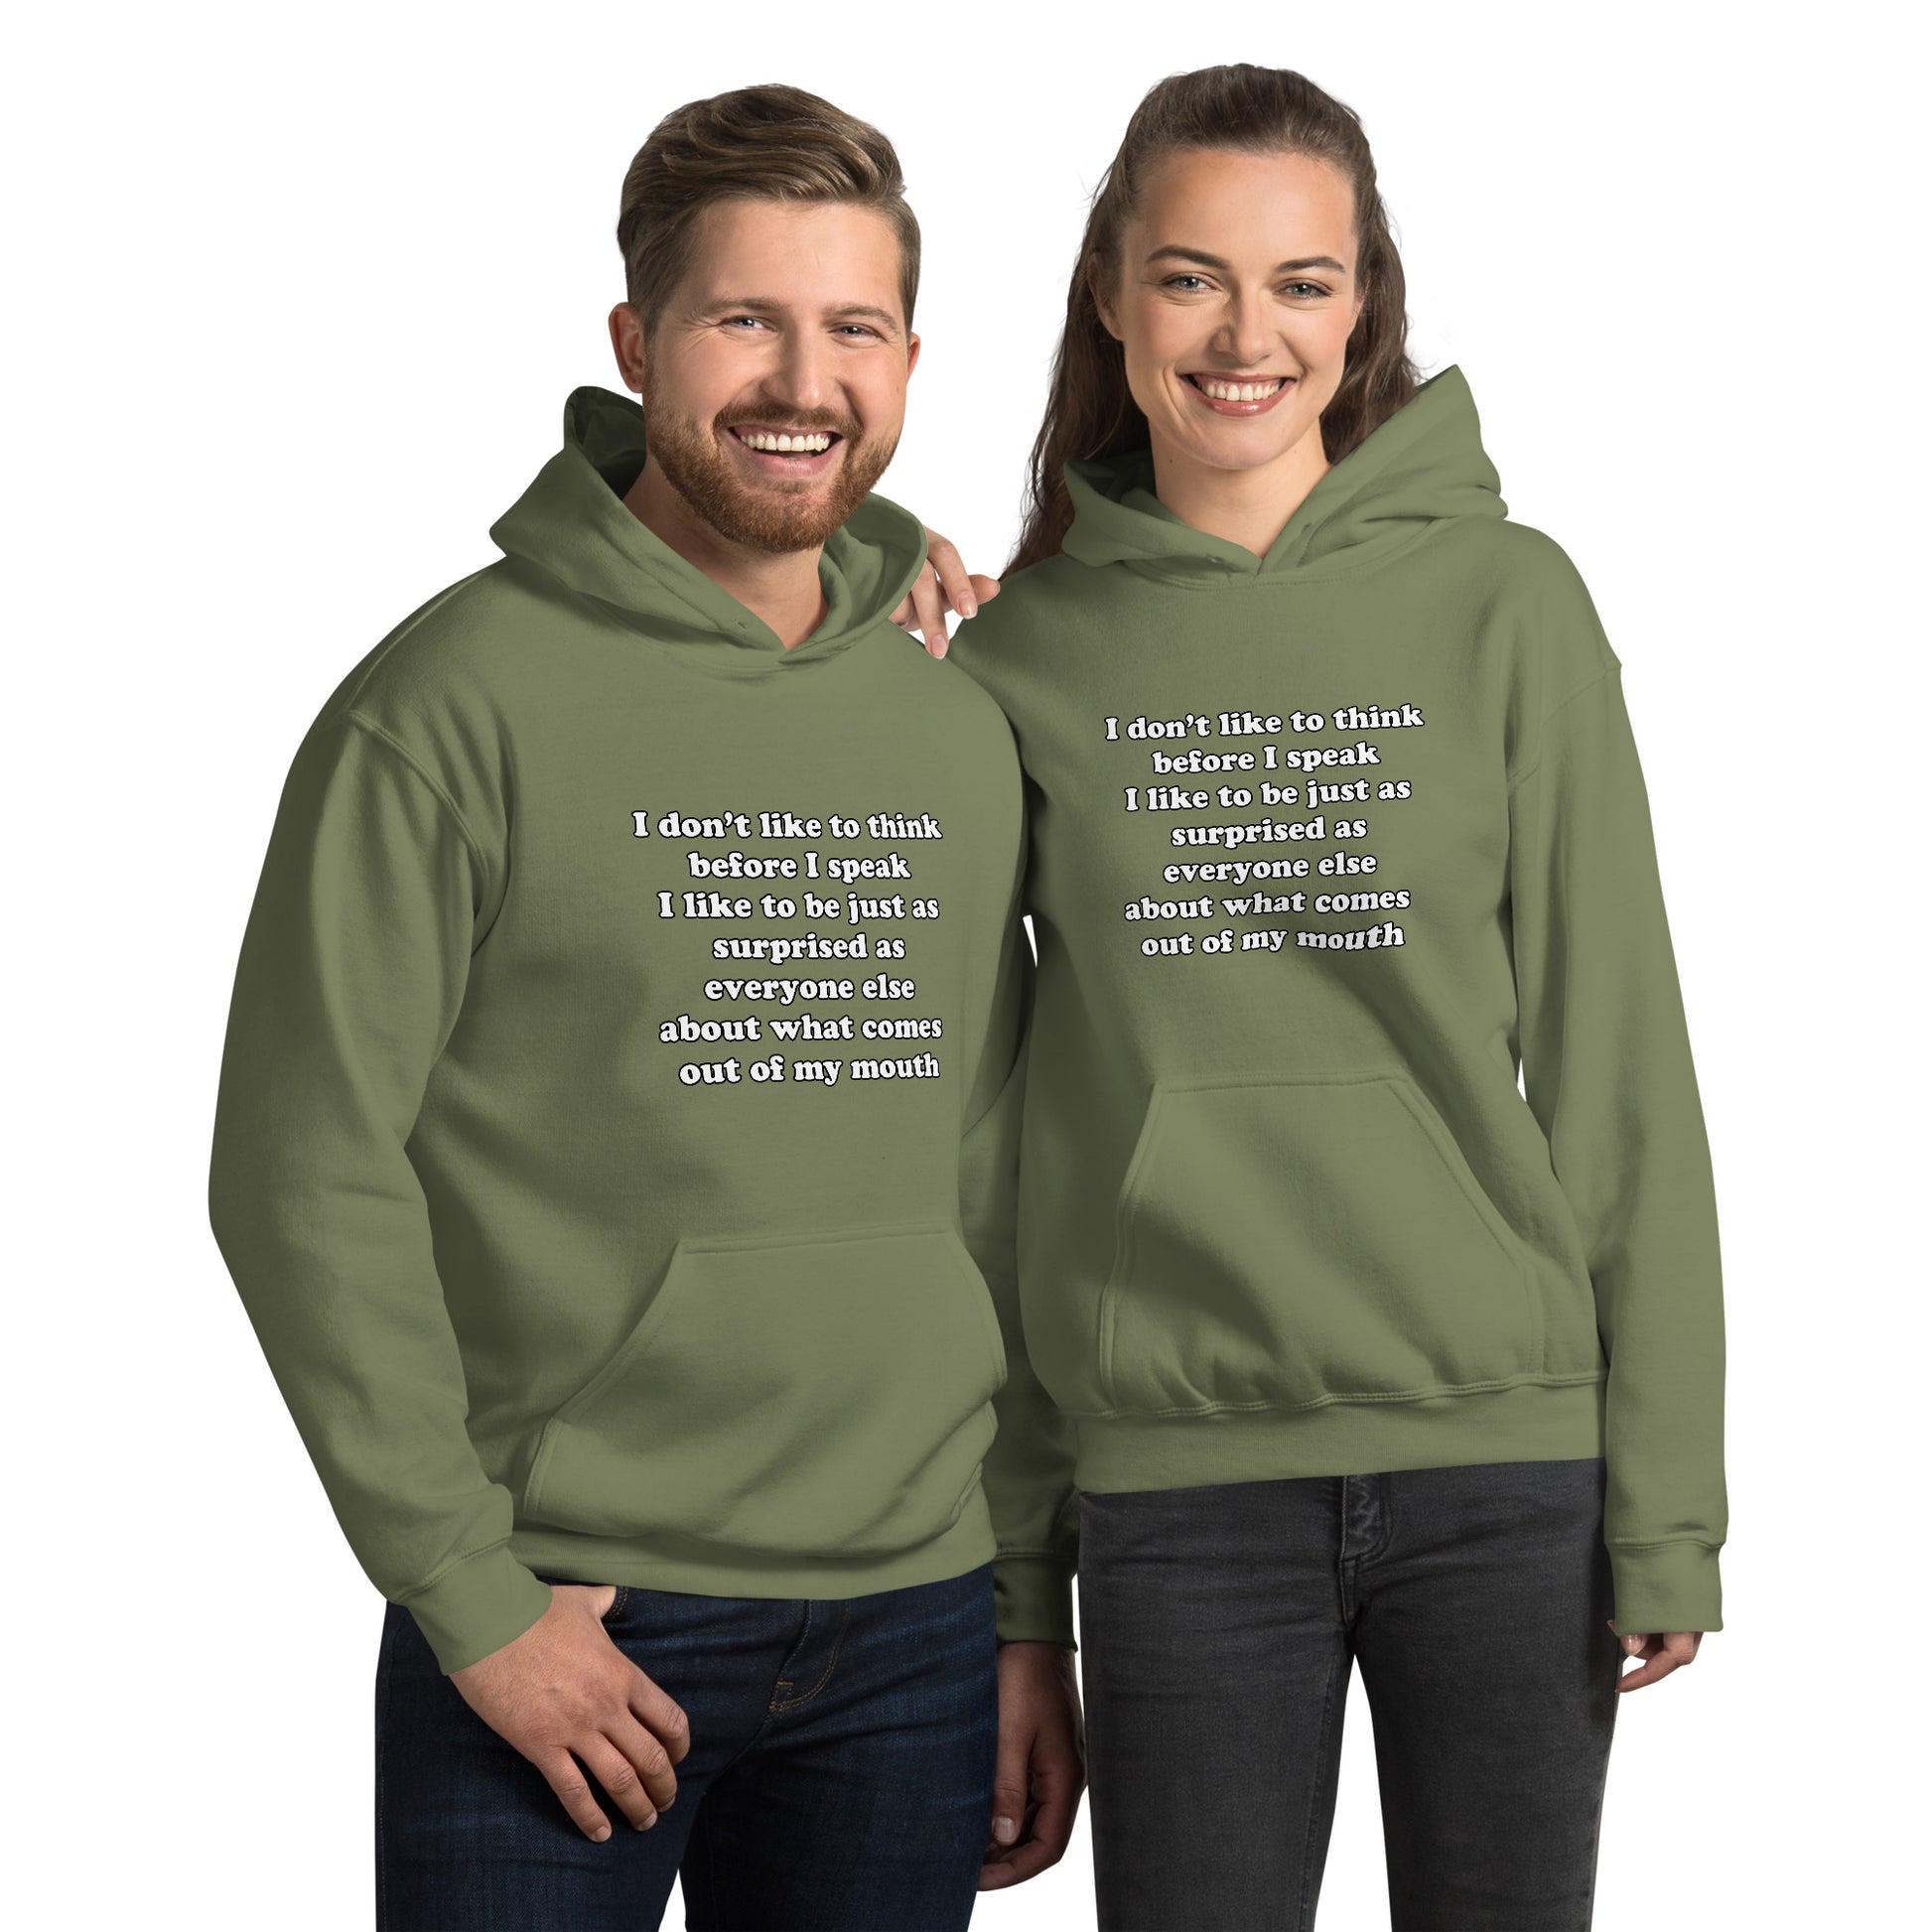 Man and woman with military green hoodie with text “I don't think before I speak Just as serprised as everyone about what comes out of my mouth"